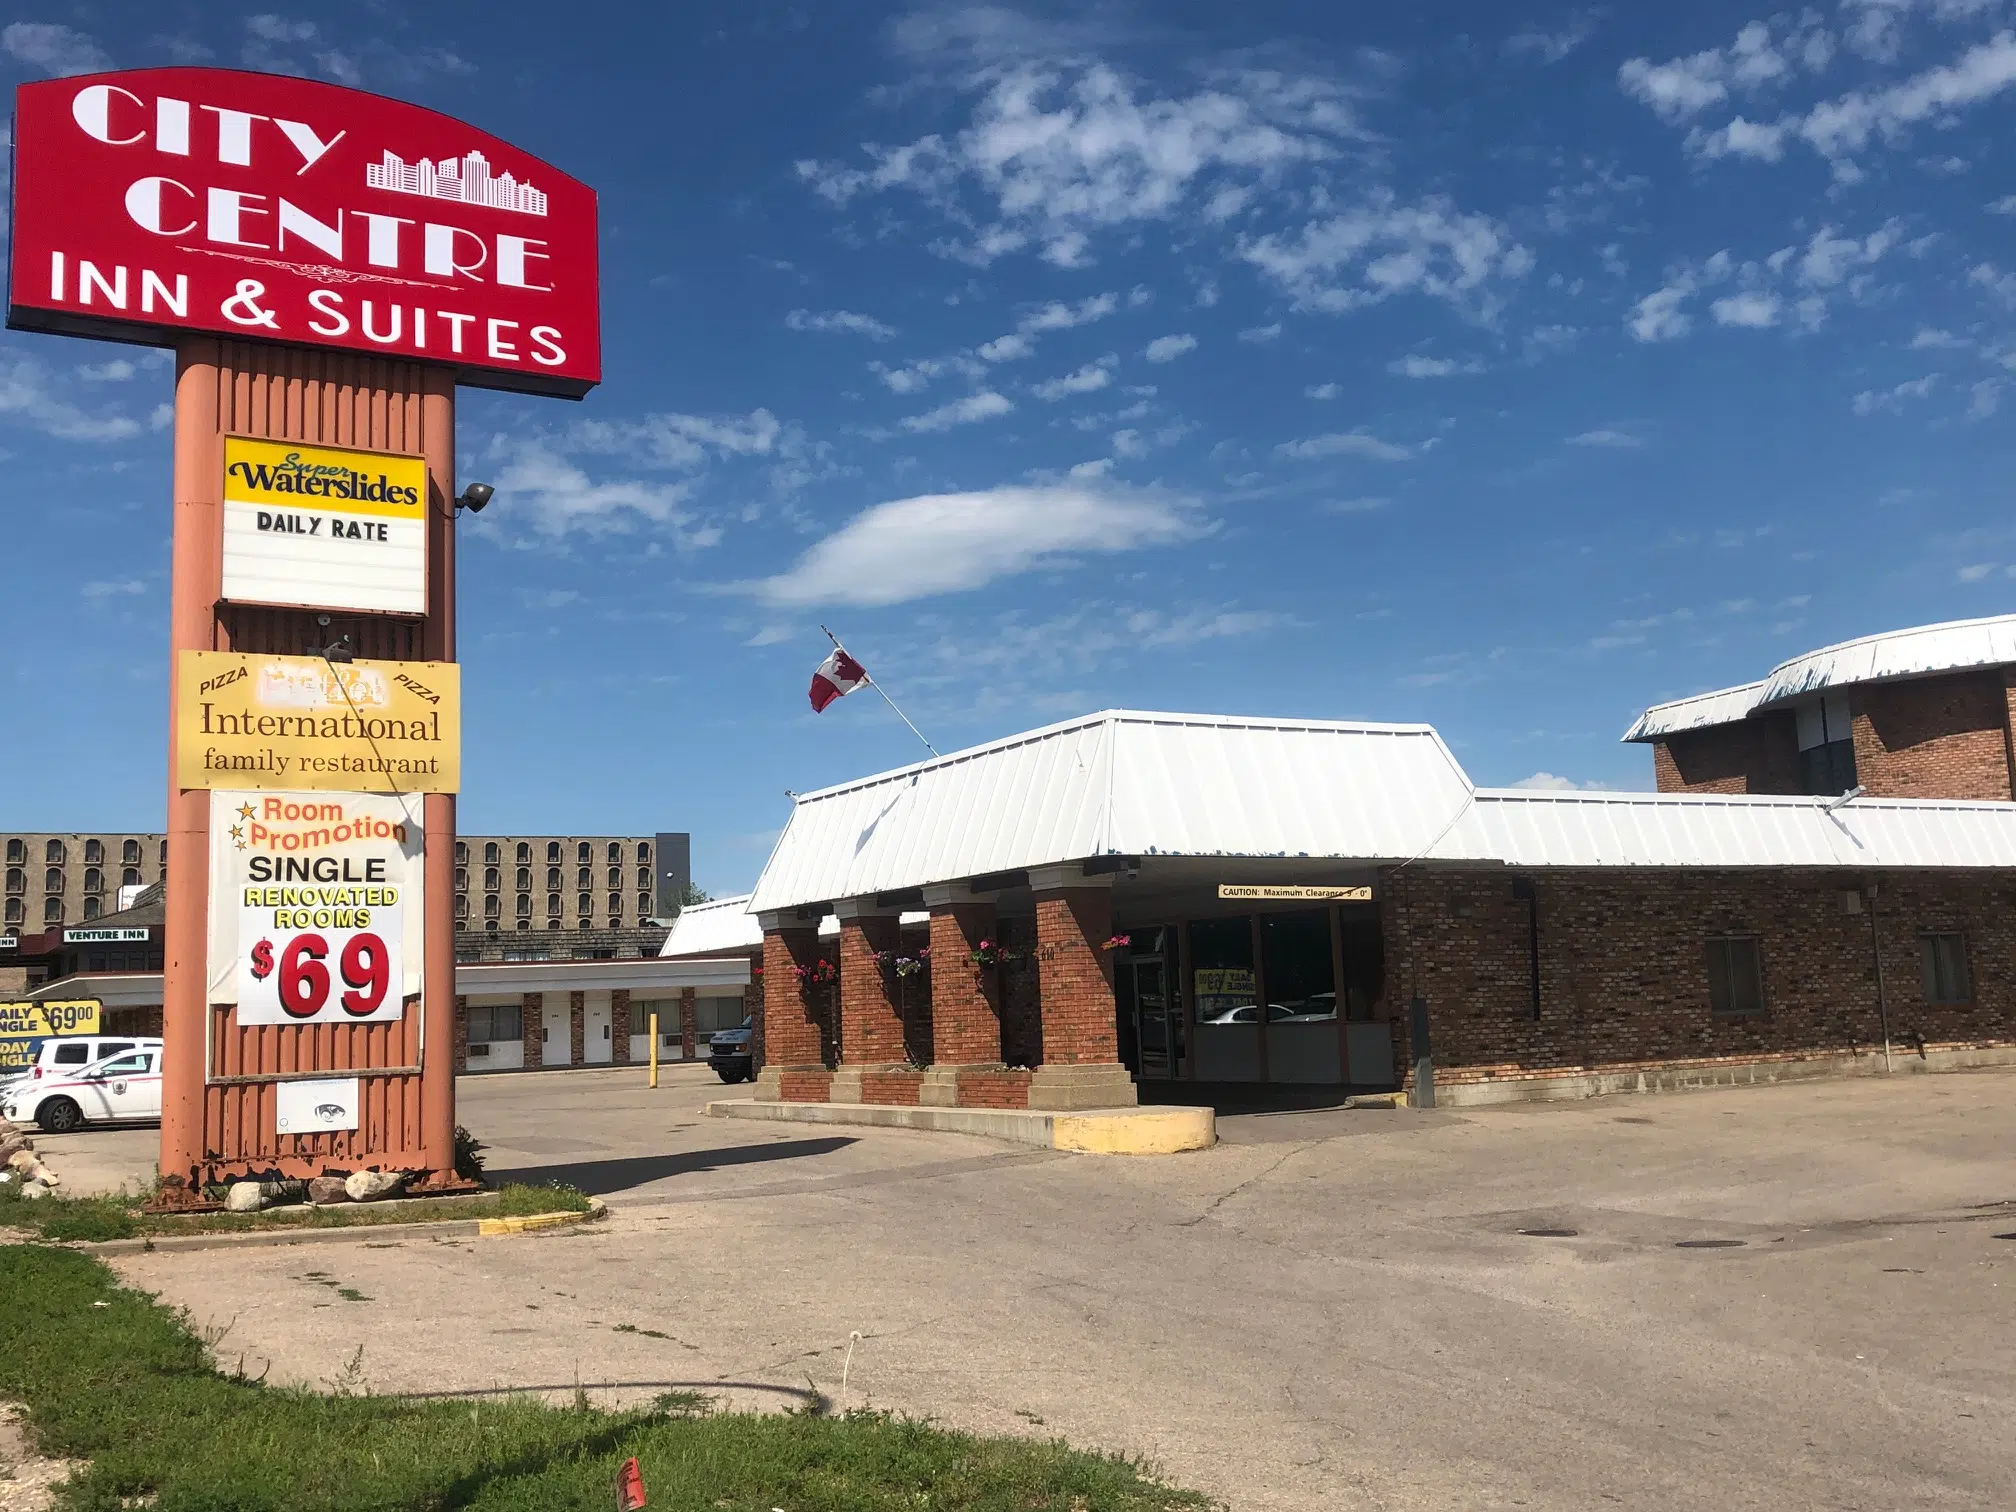 Saskatoon Mayor Charlie Clark troubled by conditions at City Centre Inn and worries there may be more sites like it